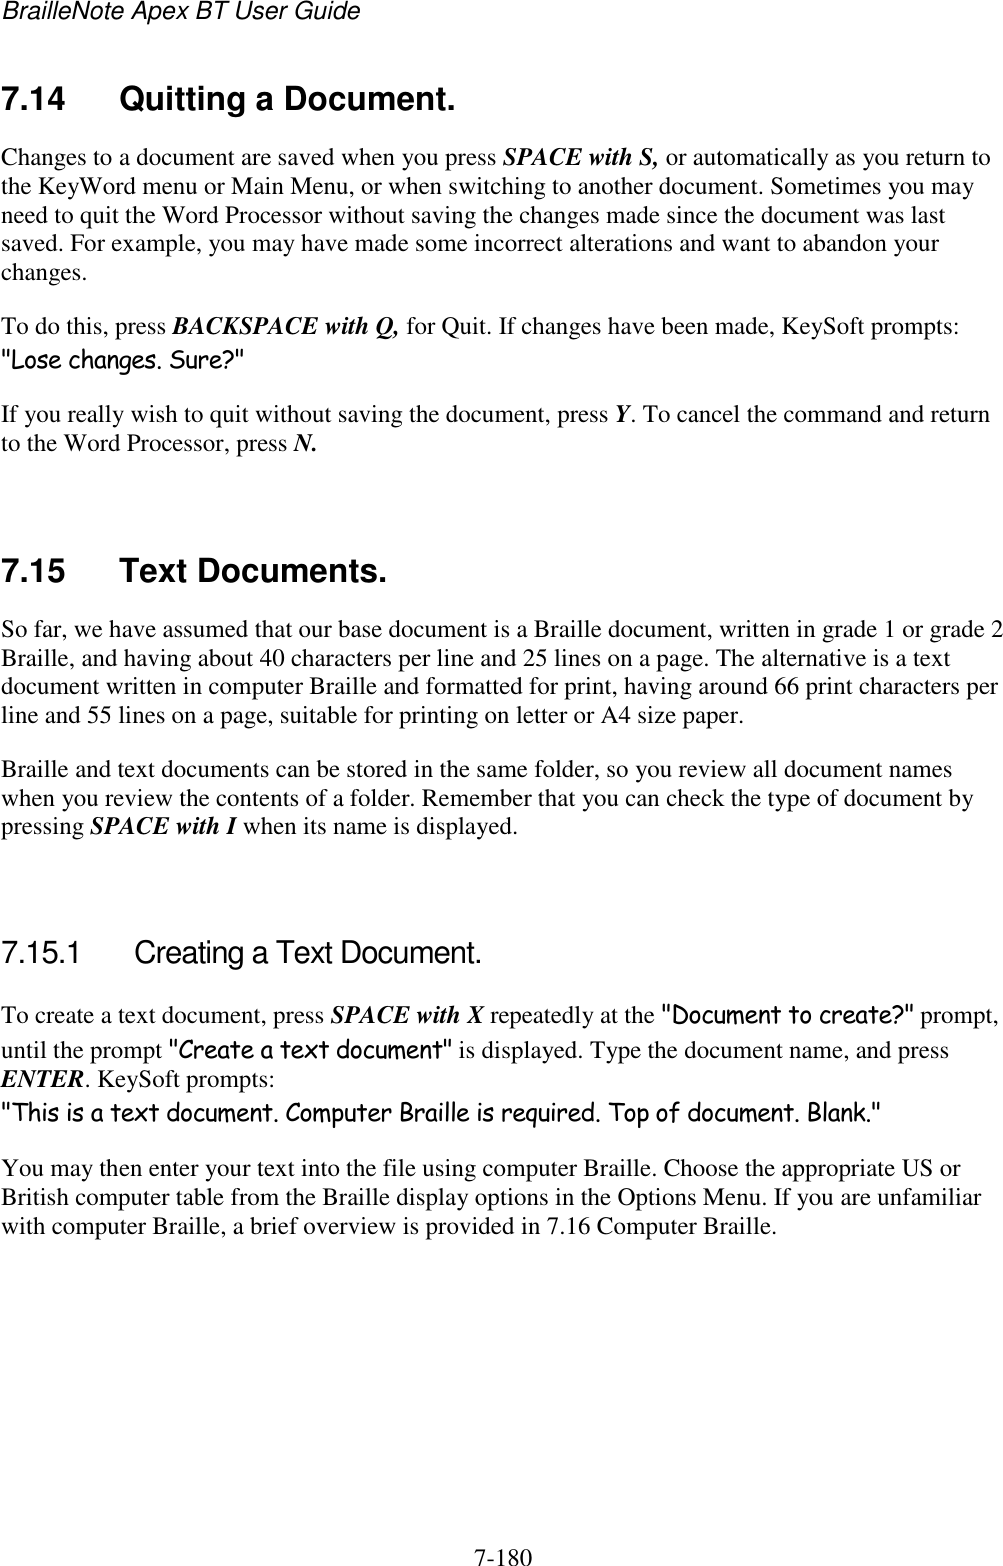 BrailleNote Apex BT User Guide   7-180   7.14  Quitting a Document. Changes to a document are saved when you press SPACE with S, or automatically as you return to the KeyWord menu or Main Menu, or when switching to another document. Sometimes you may need to quit the Word Processor without saving the changes made since the document was last saved. For example, you may have made some incorrect alterations and want to abandon your changes. To do this, press BACKSPACE with Q, for Quit. If changes have been made, KeySoft prompts: &quot;Lose changes. Sure?&quot; If you really wish to quit without saving the document, press Y. To cancel the command and return to the Word Processor, press N.   7.15  Text Documents. So far, we have assumed that our base document is a Braille document, written in grade 1 or grade 2 Braille, and having about 40 characters per line and 25 lines on a page. The alternative is a text document written in computer Braille and formatted for print, having around 66 print characters per line and 55 lines on a page, suitable for printing on letter or A4 size paper. Braille and text documents can be stored in the same folder, so you review all document names when you review the contents of a folder. Remember that you can check the type of document by pressing SPACE with I when its name is displayed.   7.15.1  Creating a Text Document. To create a text document, press SPACE with X repeatedly at the &quot;Document to create?&quot; prompt, until the prompt &quot;Create a text document&quot; is displayed. Type the document name, and press ENTER. KeySoft prompts: &quot;This is a text document. Computer Braille is required. Top of document. Blank.&quot; You may then enter your text into the file using computer Braille. Choose the appropriate US or British computer table from the Braille display options in the Options Menu. If you are unfamiliar with computer Braille, a brief overview is provided in 7.16 Computer Braille.   